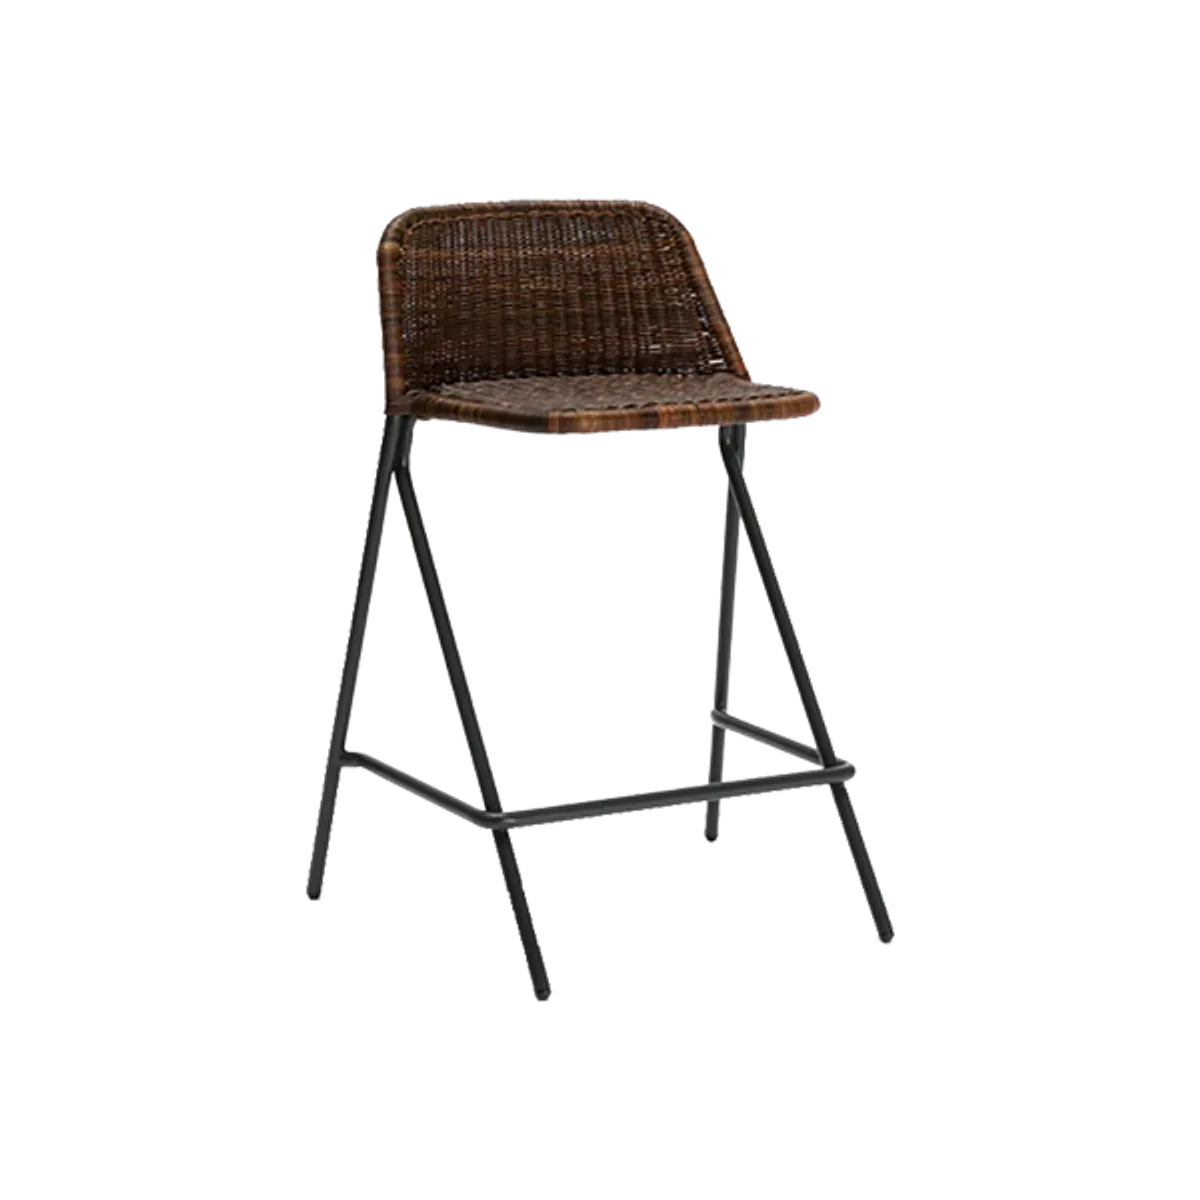 Web Persi Stool With Backrest Charcoal Rust Rattan And Metal Barstool Furniture For Restaurants Cafes And Hotels2